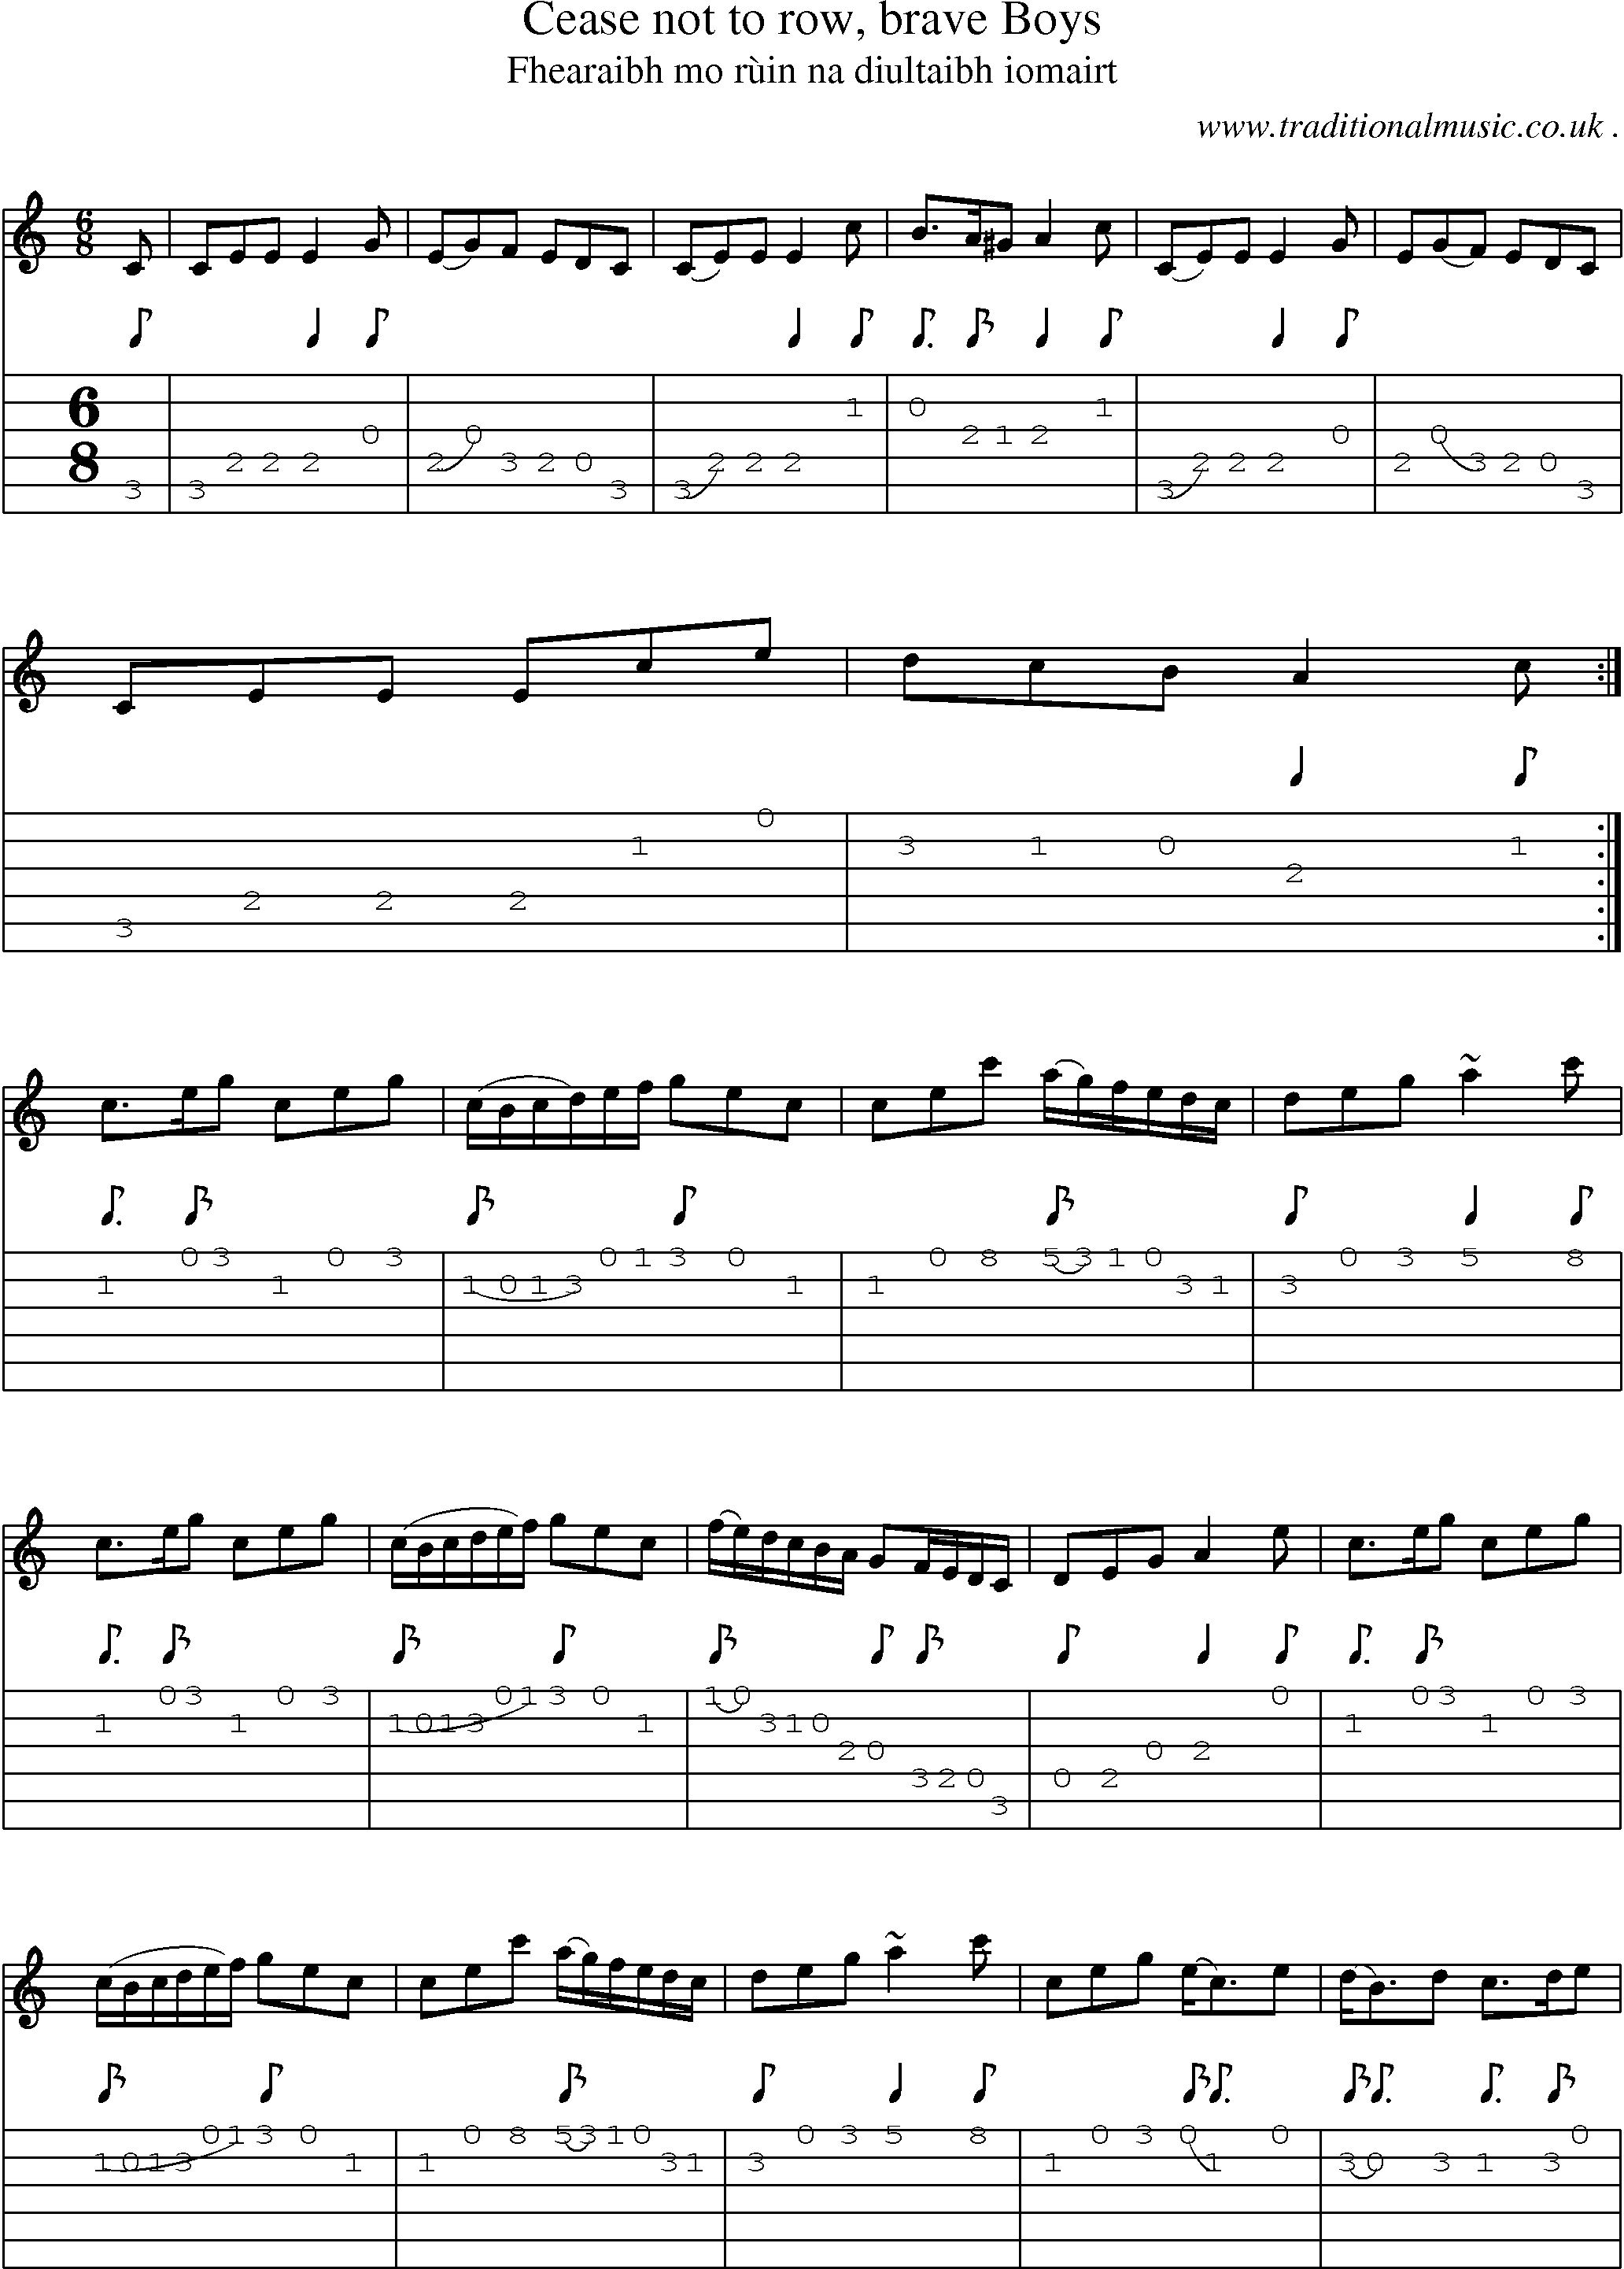 Sheet-music  score, Chords and Guitar Tabs for Cease Not To Row Brave Boys